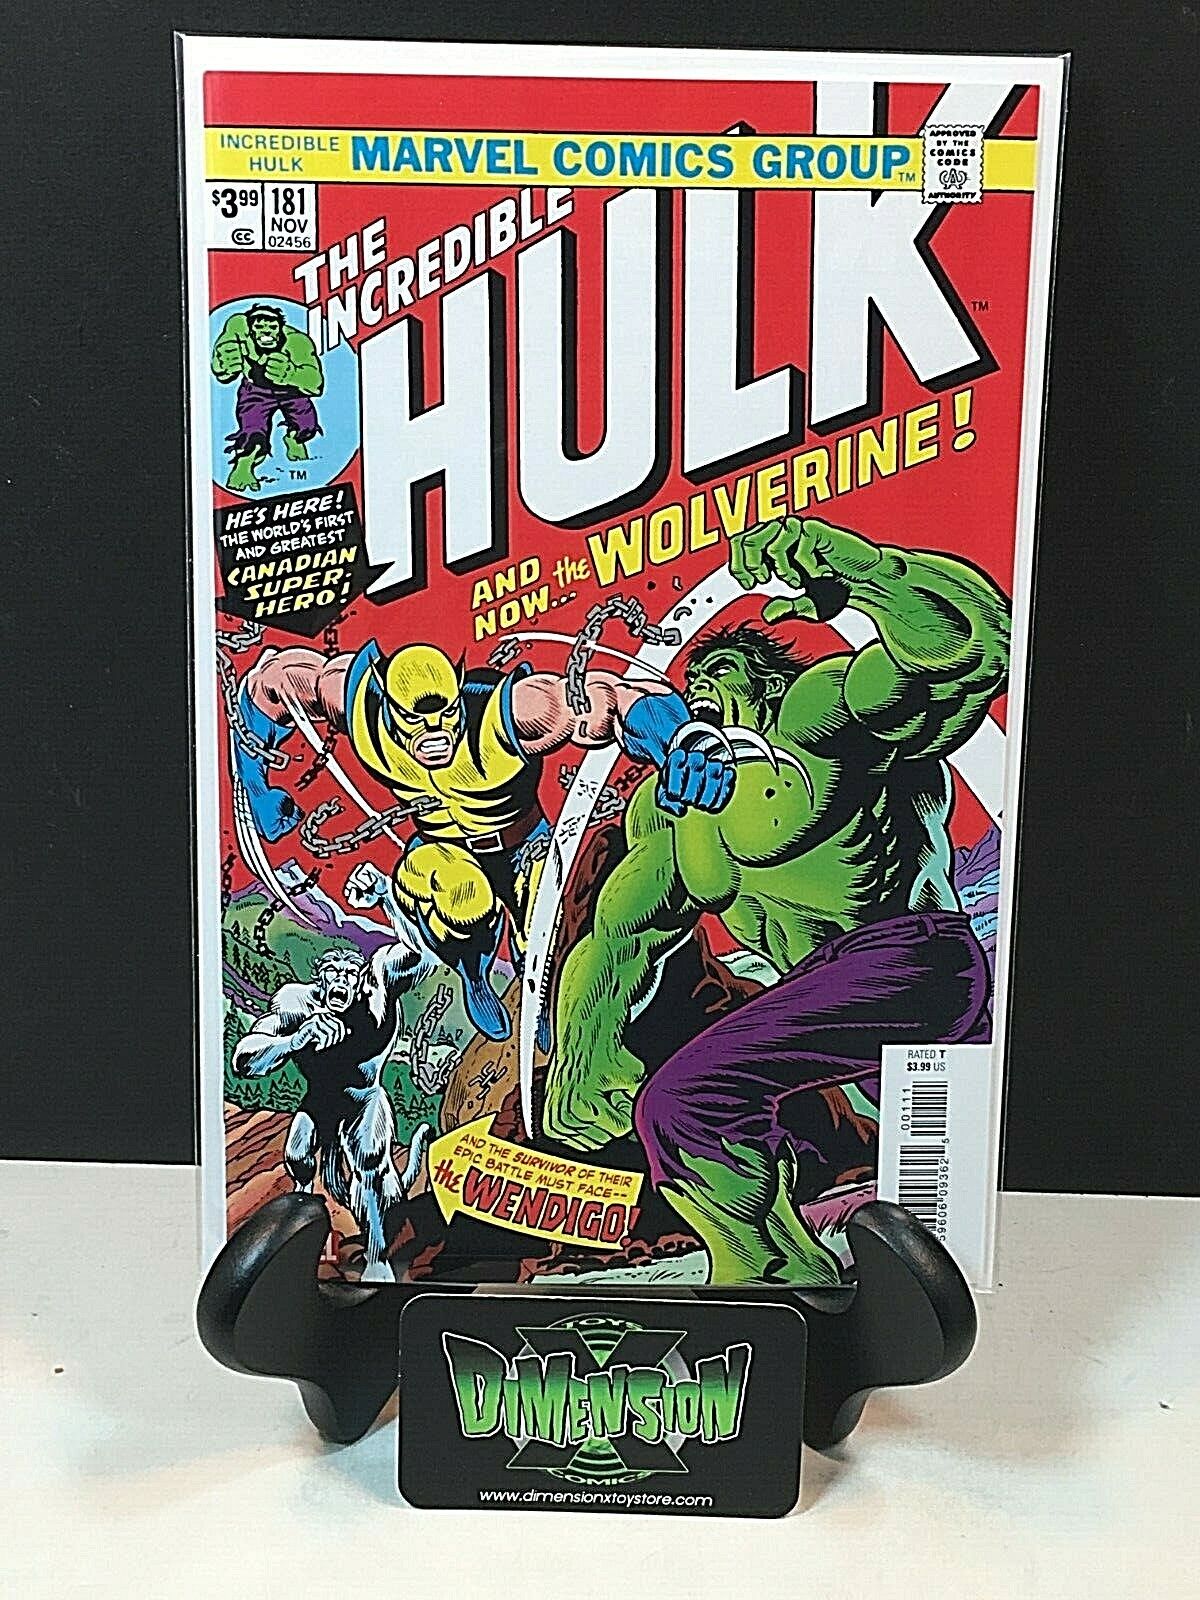  INCREDIBLE HULK #181 FACSIMILE EDITION 1ST FULL APPEARANCE WOLVERINE 1ST PRINT